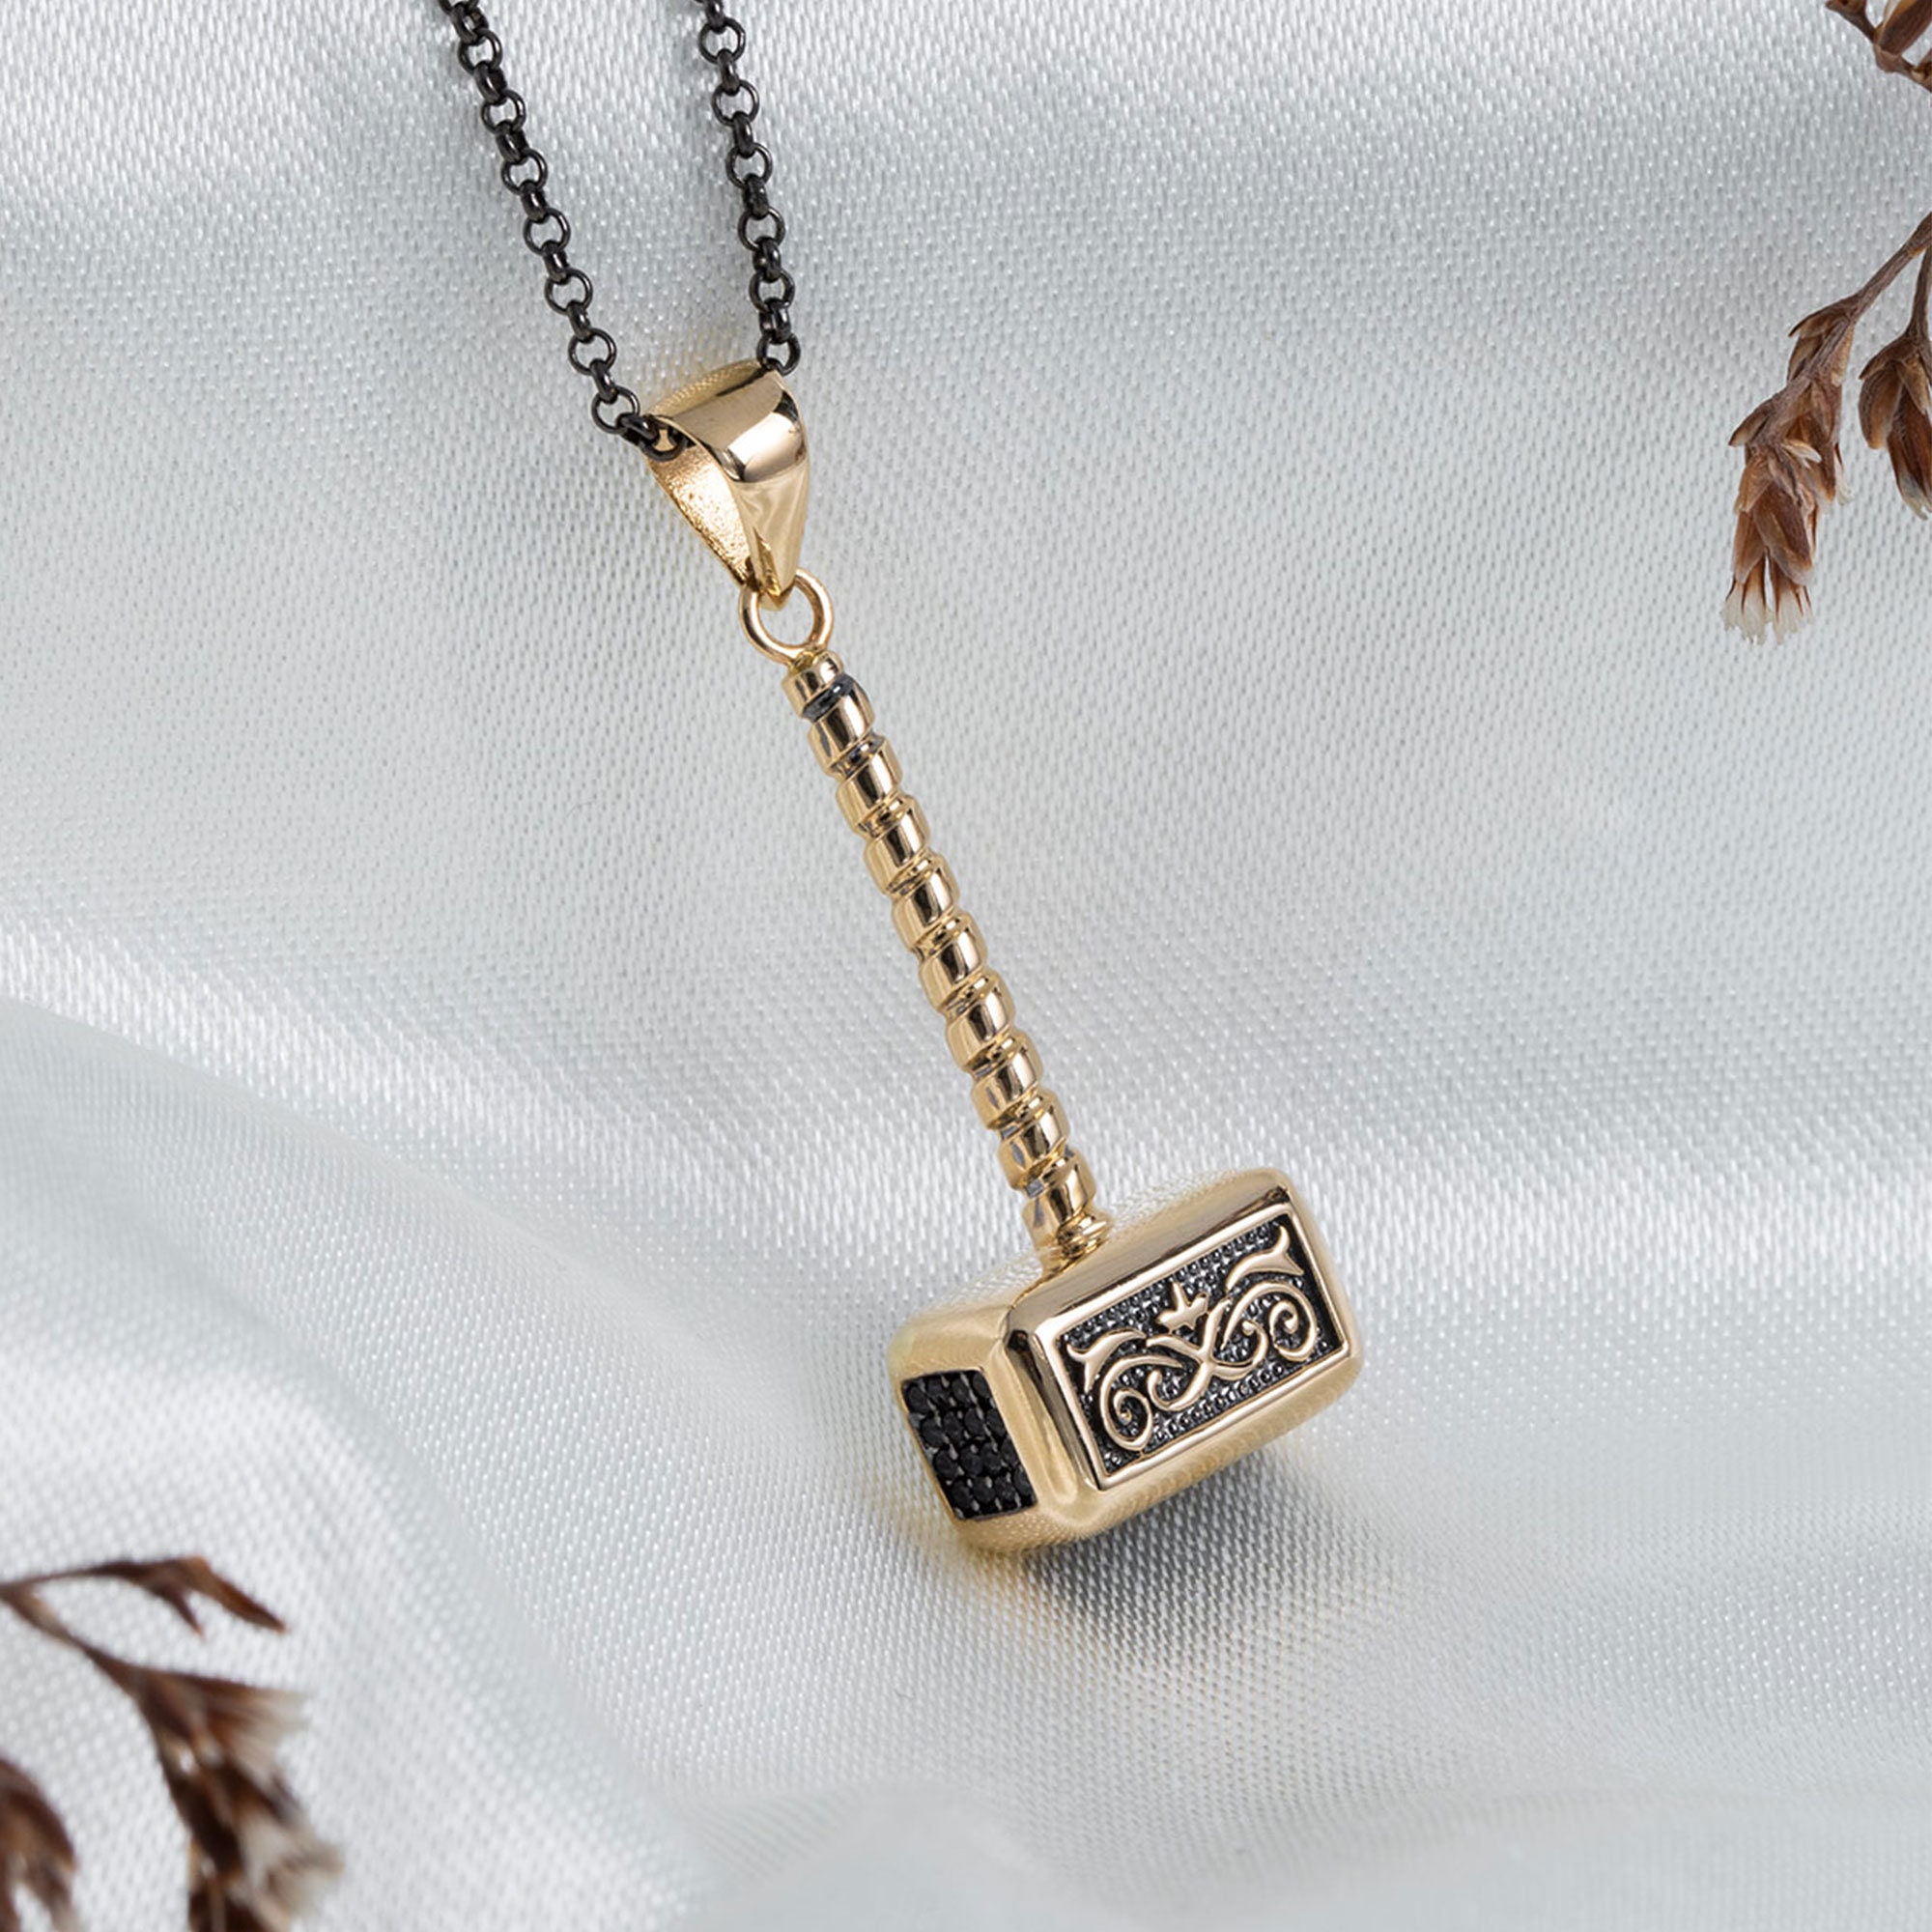 Gold Mjolnir Necklace With Steel Or Leather Chain | Viking-Store